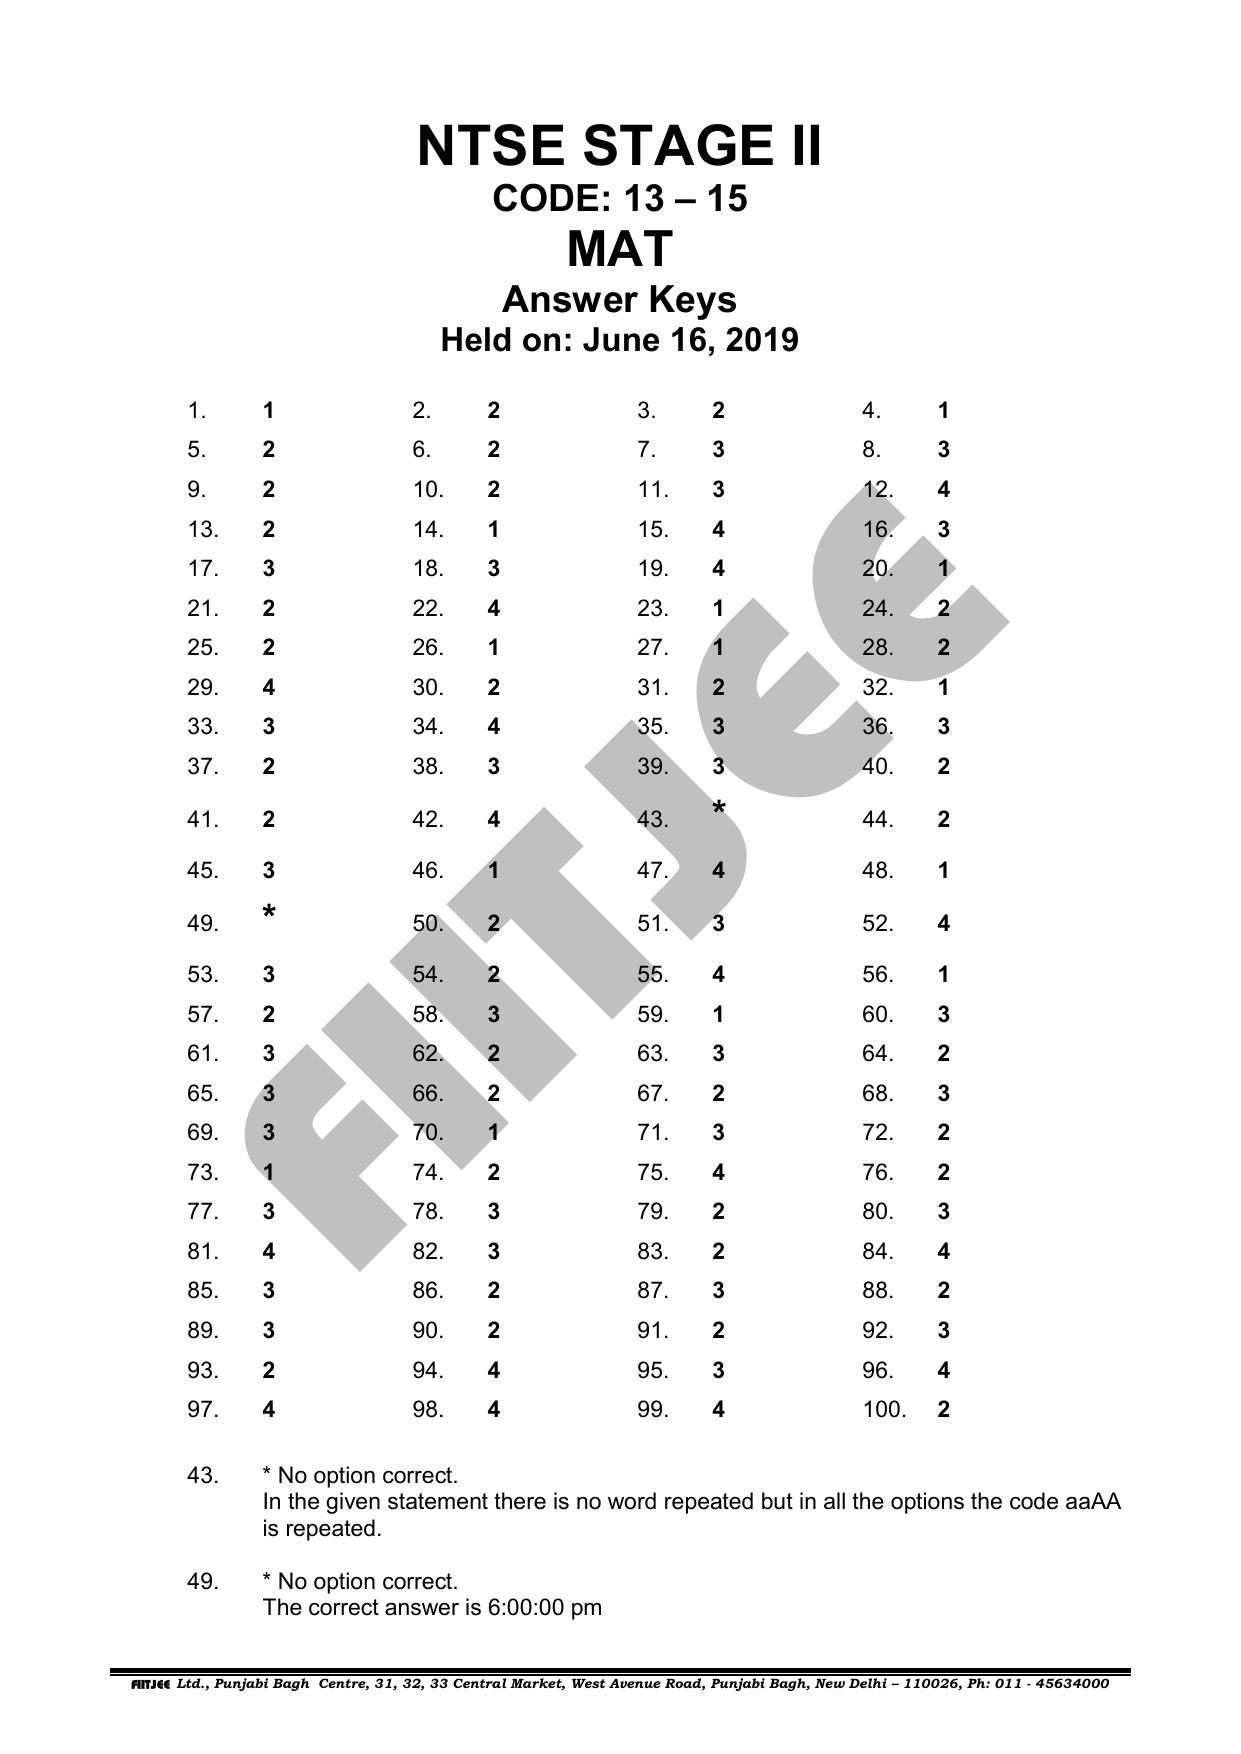 NTSE 2019 (Stage II) MAT Question Paper with Solution (June 16, 2019) - Page 1